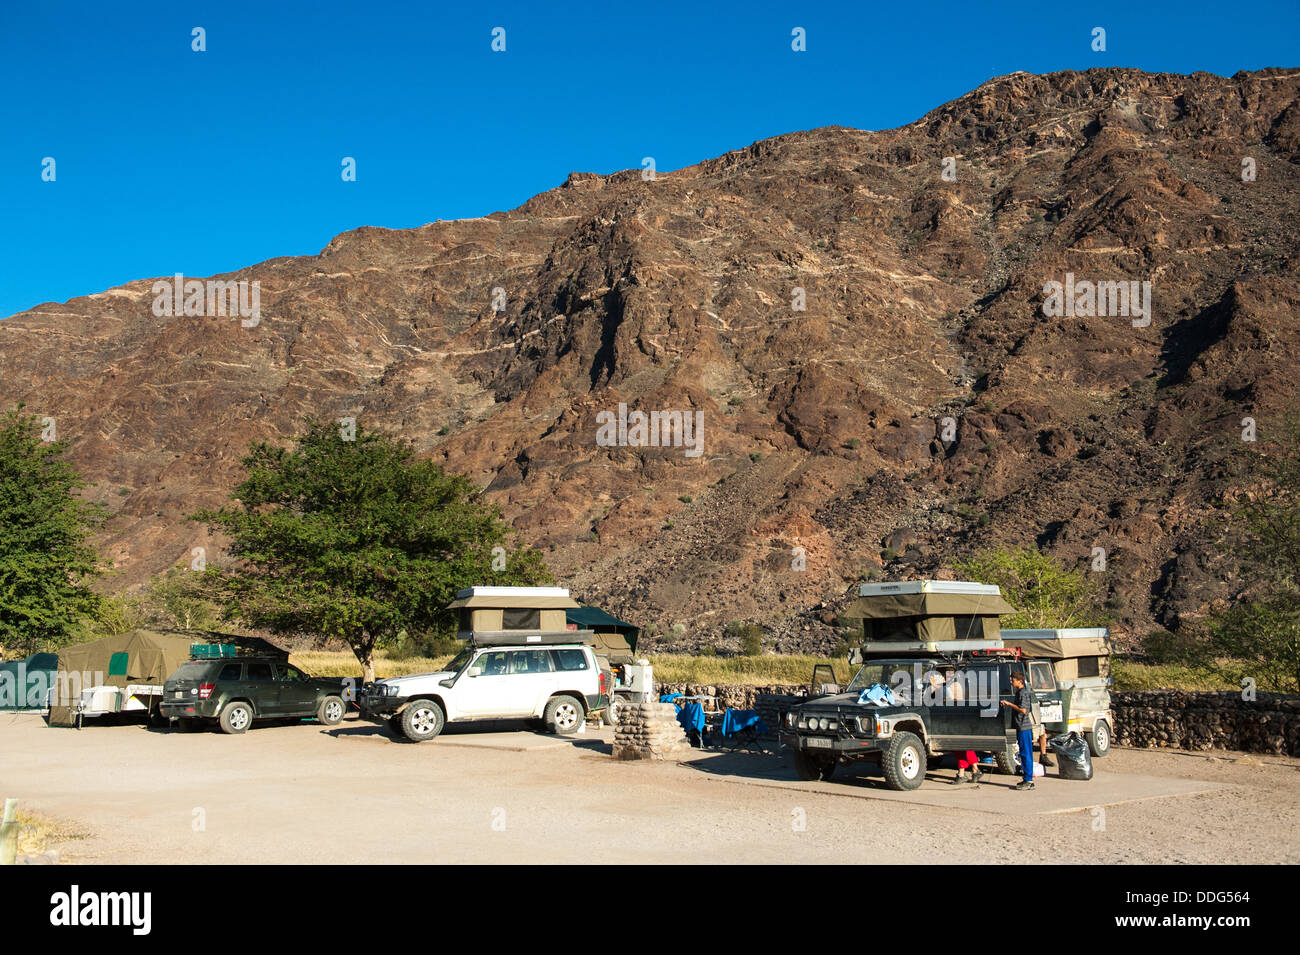 People with their camper vehicles at Ai-Ais campsite, Southern Region, Namibia Stock Photo